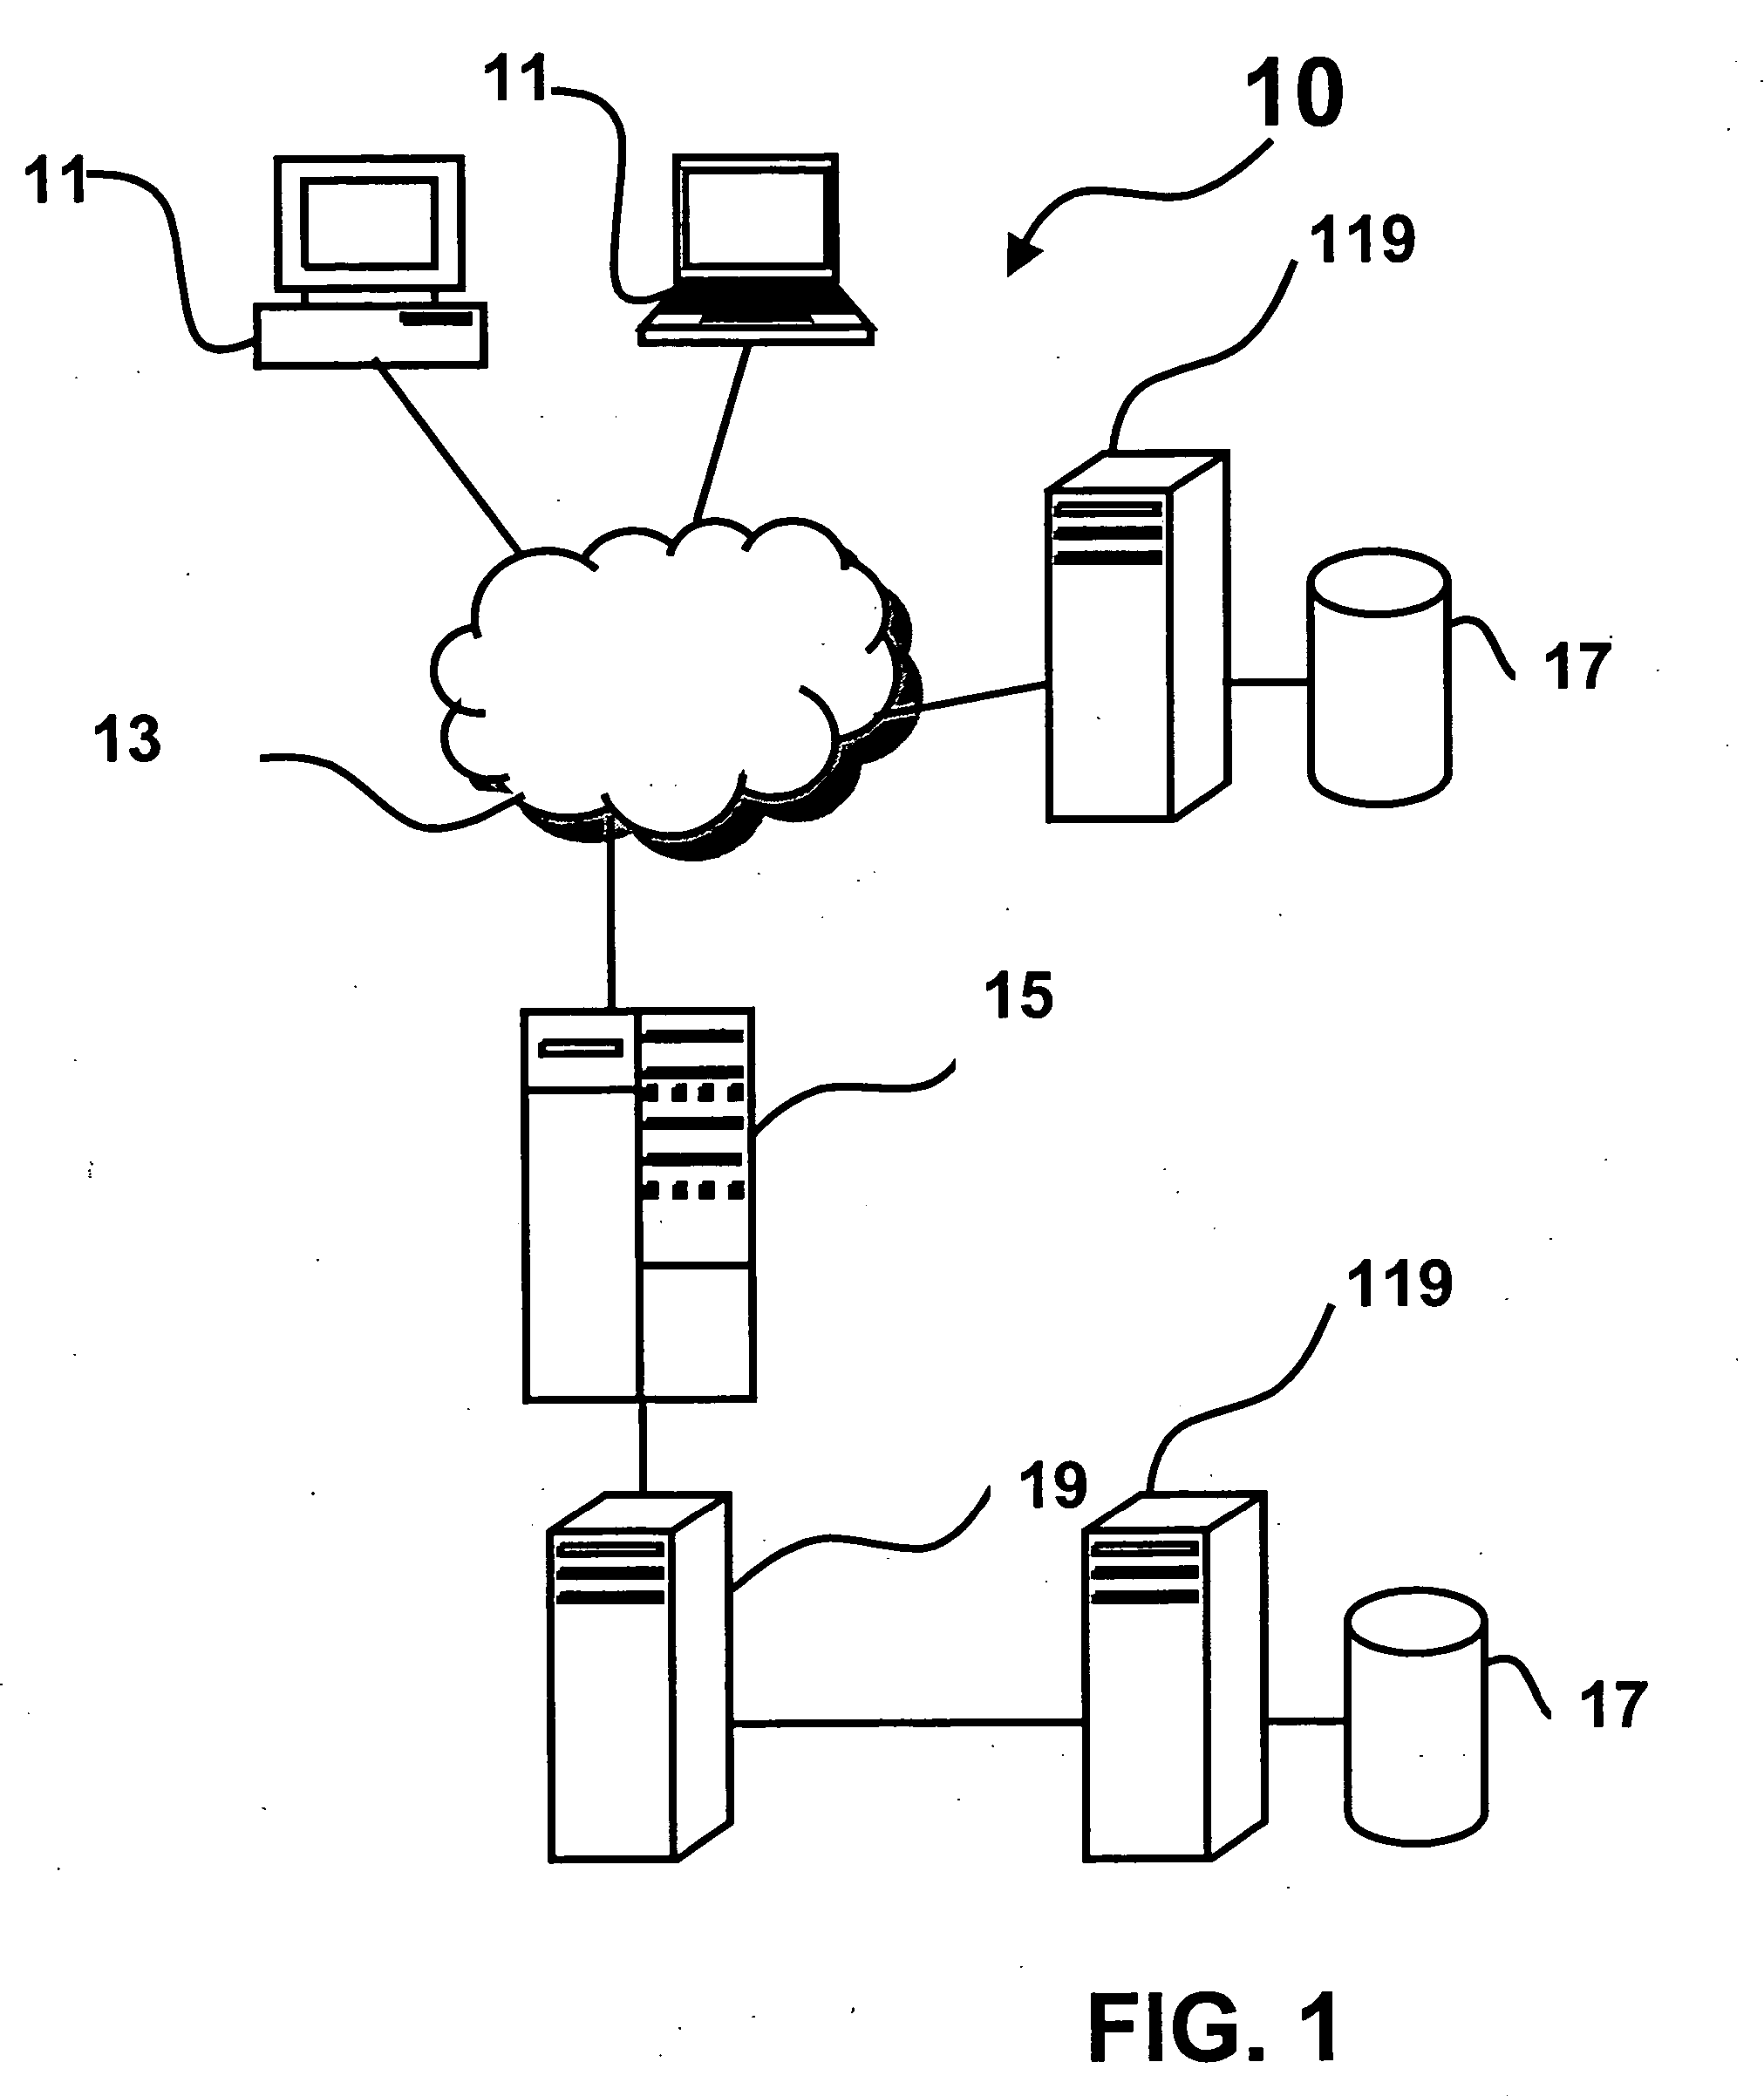 Method and system for creating and providing a multi-tier networked service